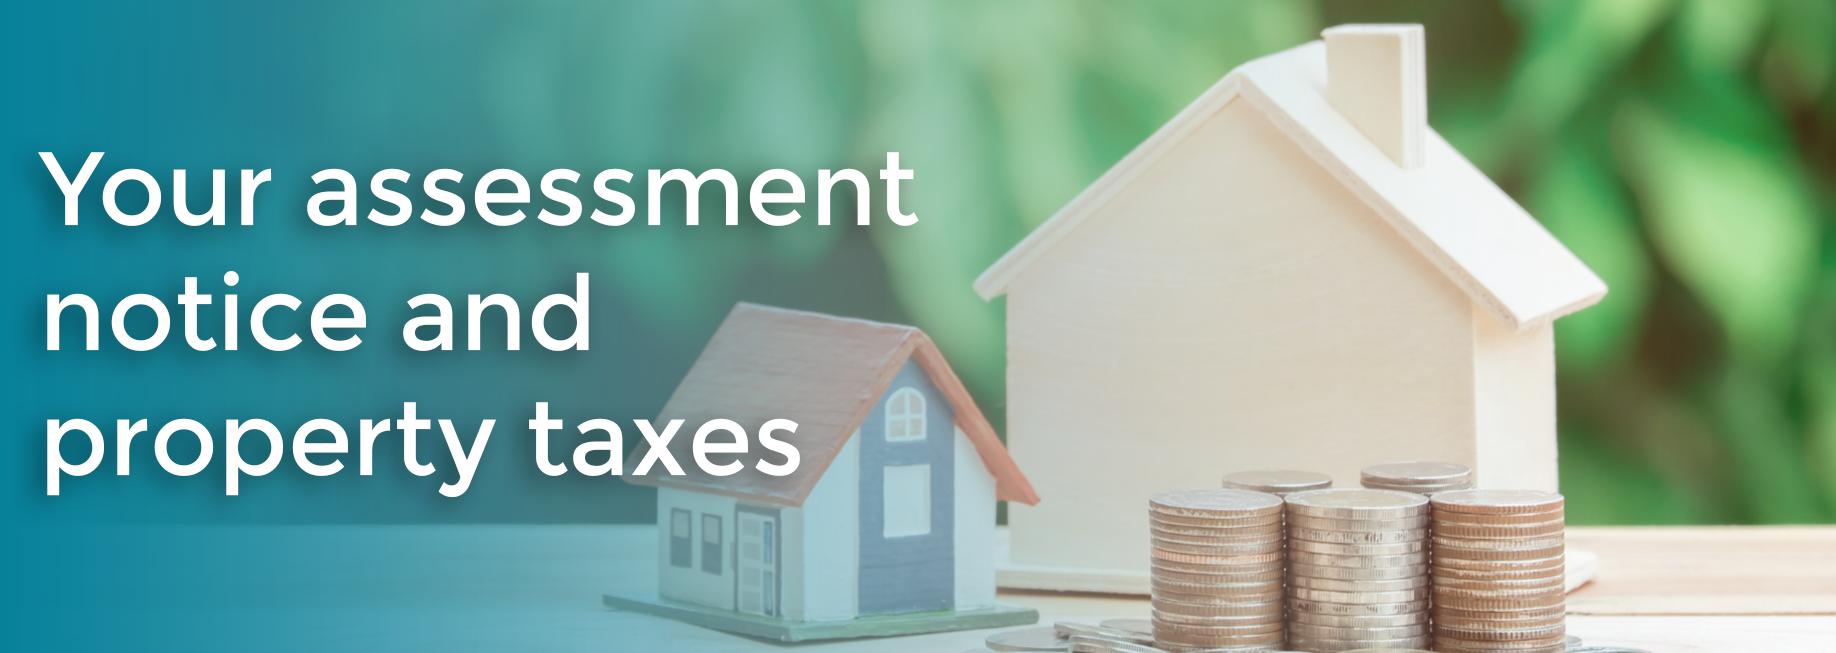 Your assessment notice and property taxes